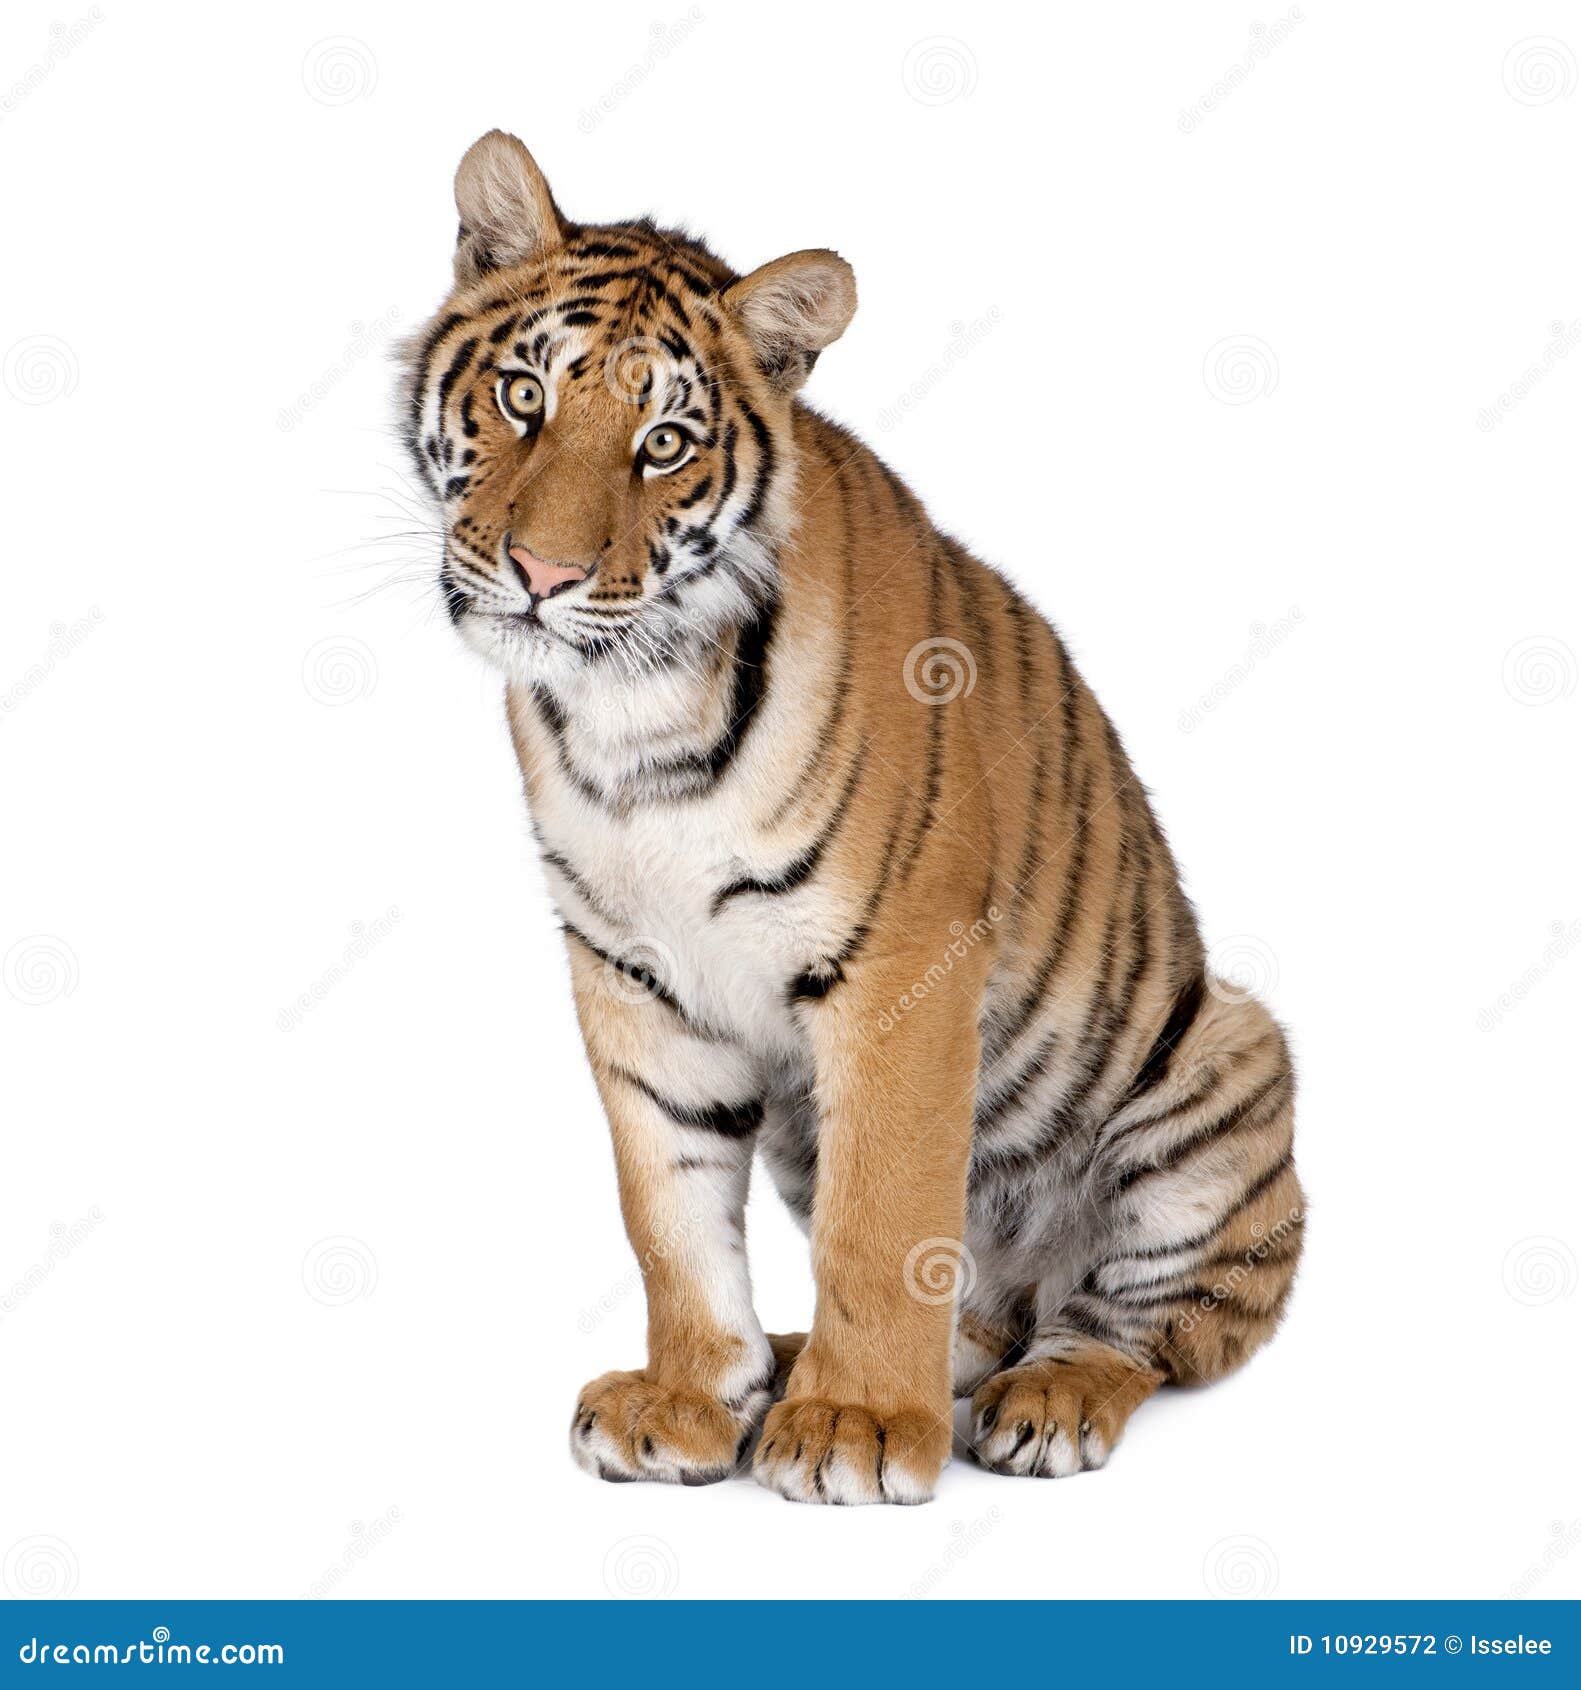 bengal tiger in front of a white background